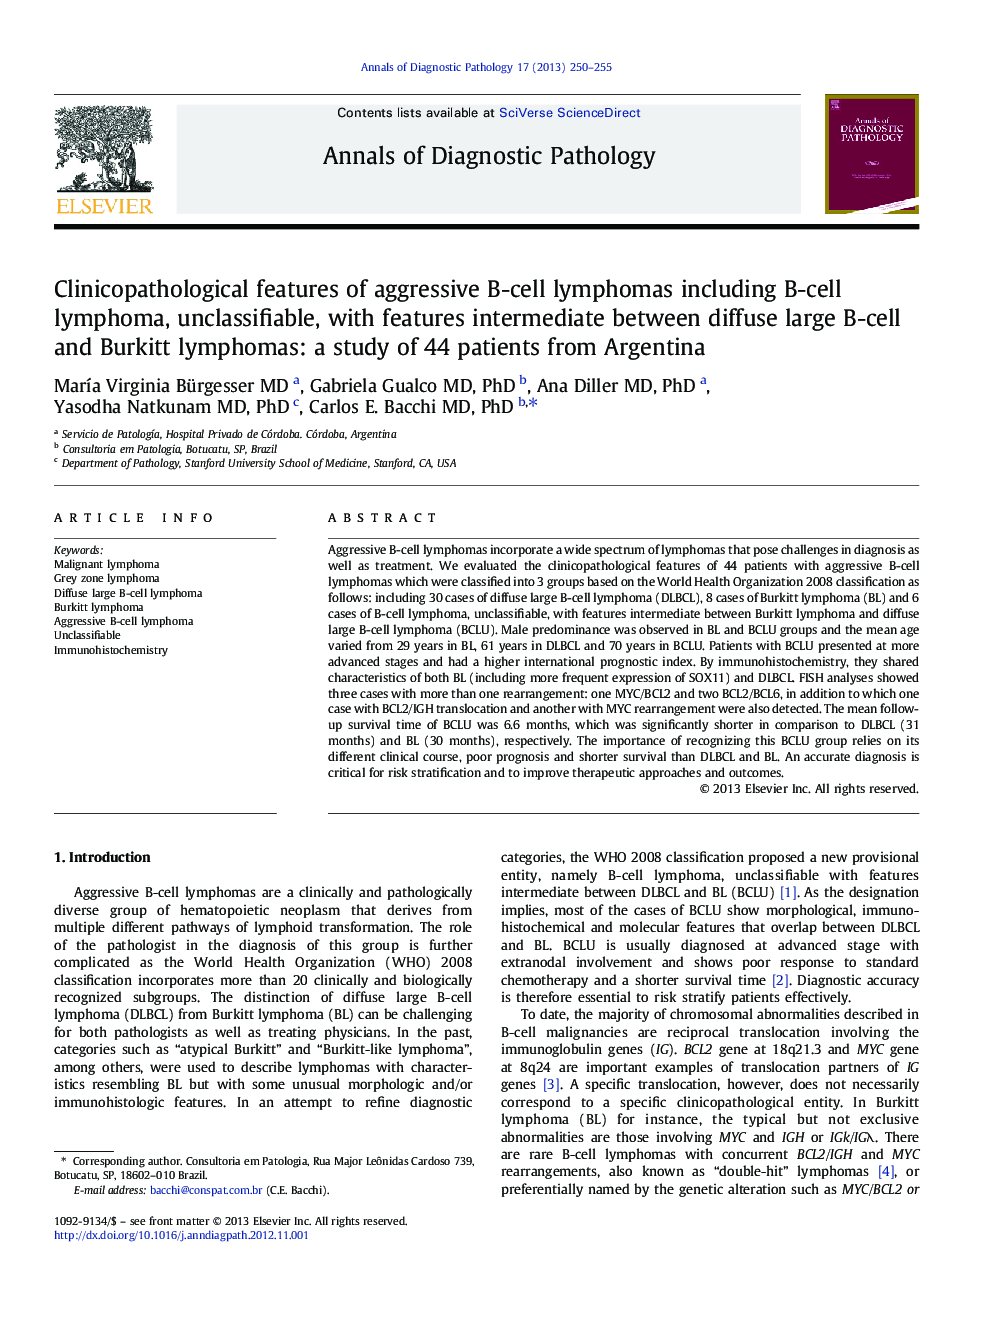 Clinicopathological features of aggressive B-cell lymphomas including B-cell lymphoma, unclassifiable, with features intermediate between diffuse large B-cell and Burkitt lymphomas: a study of 44 patients from Argentina